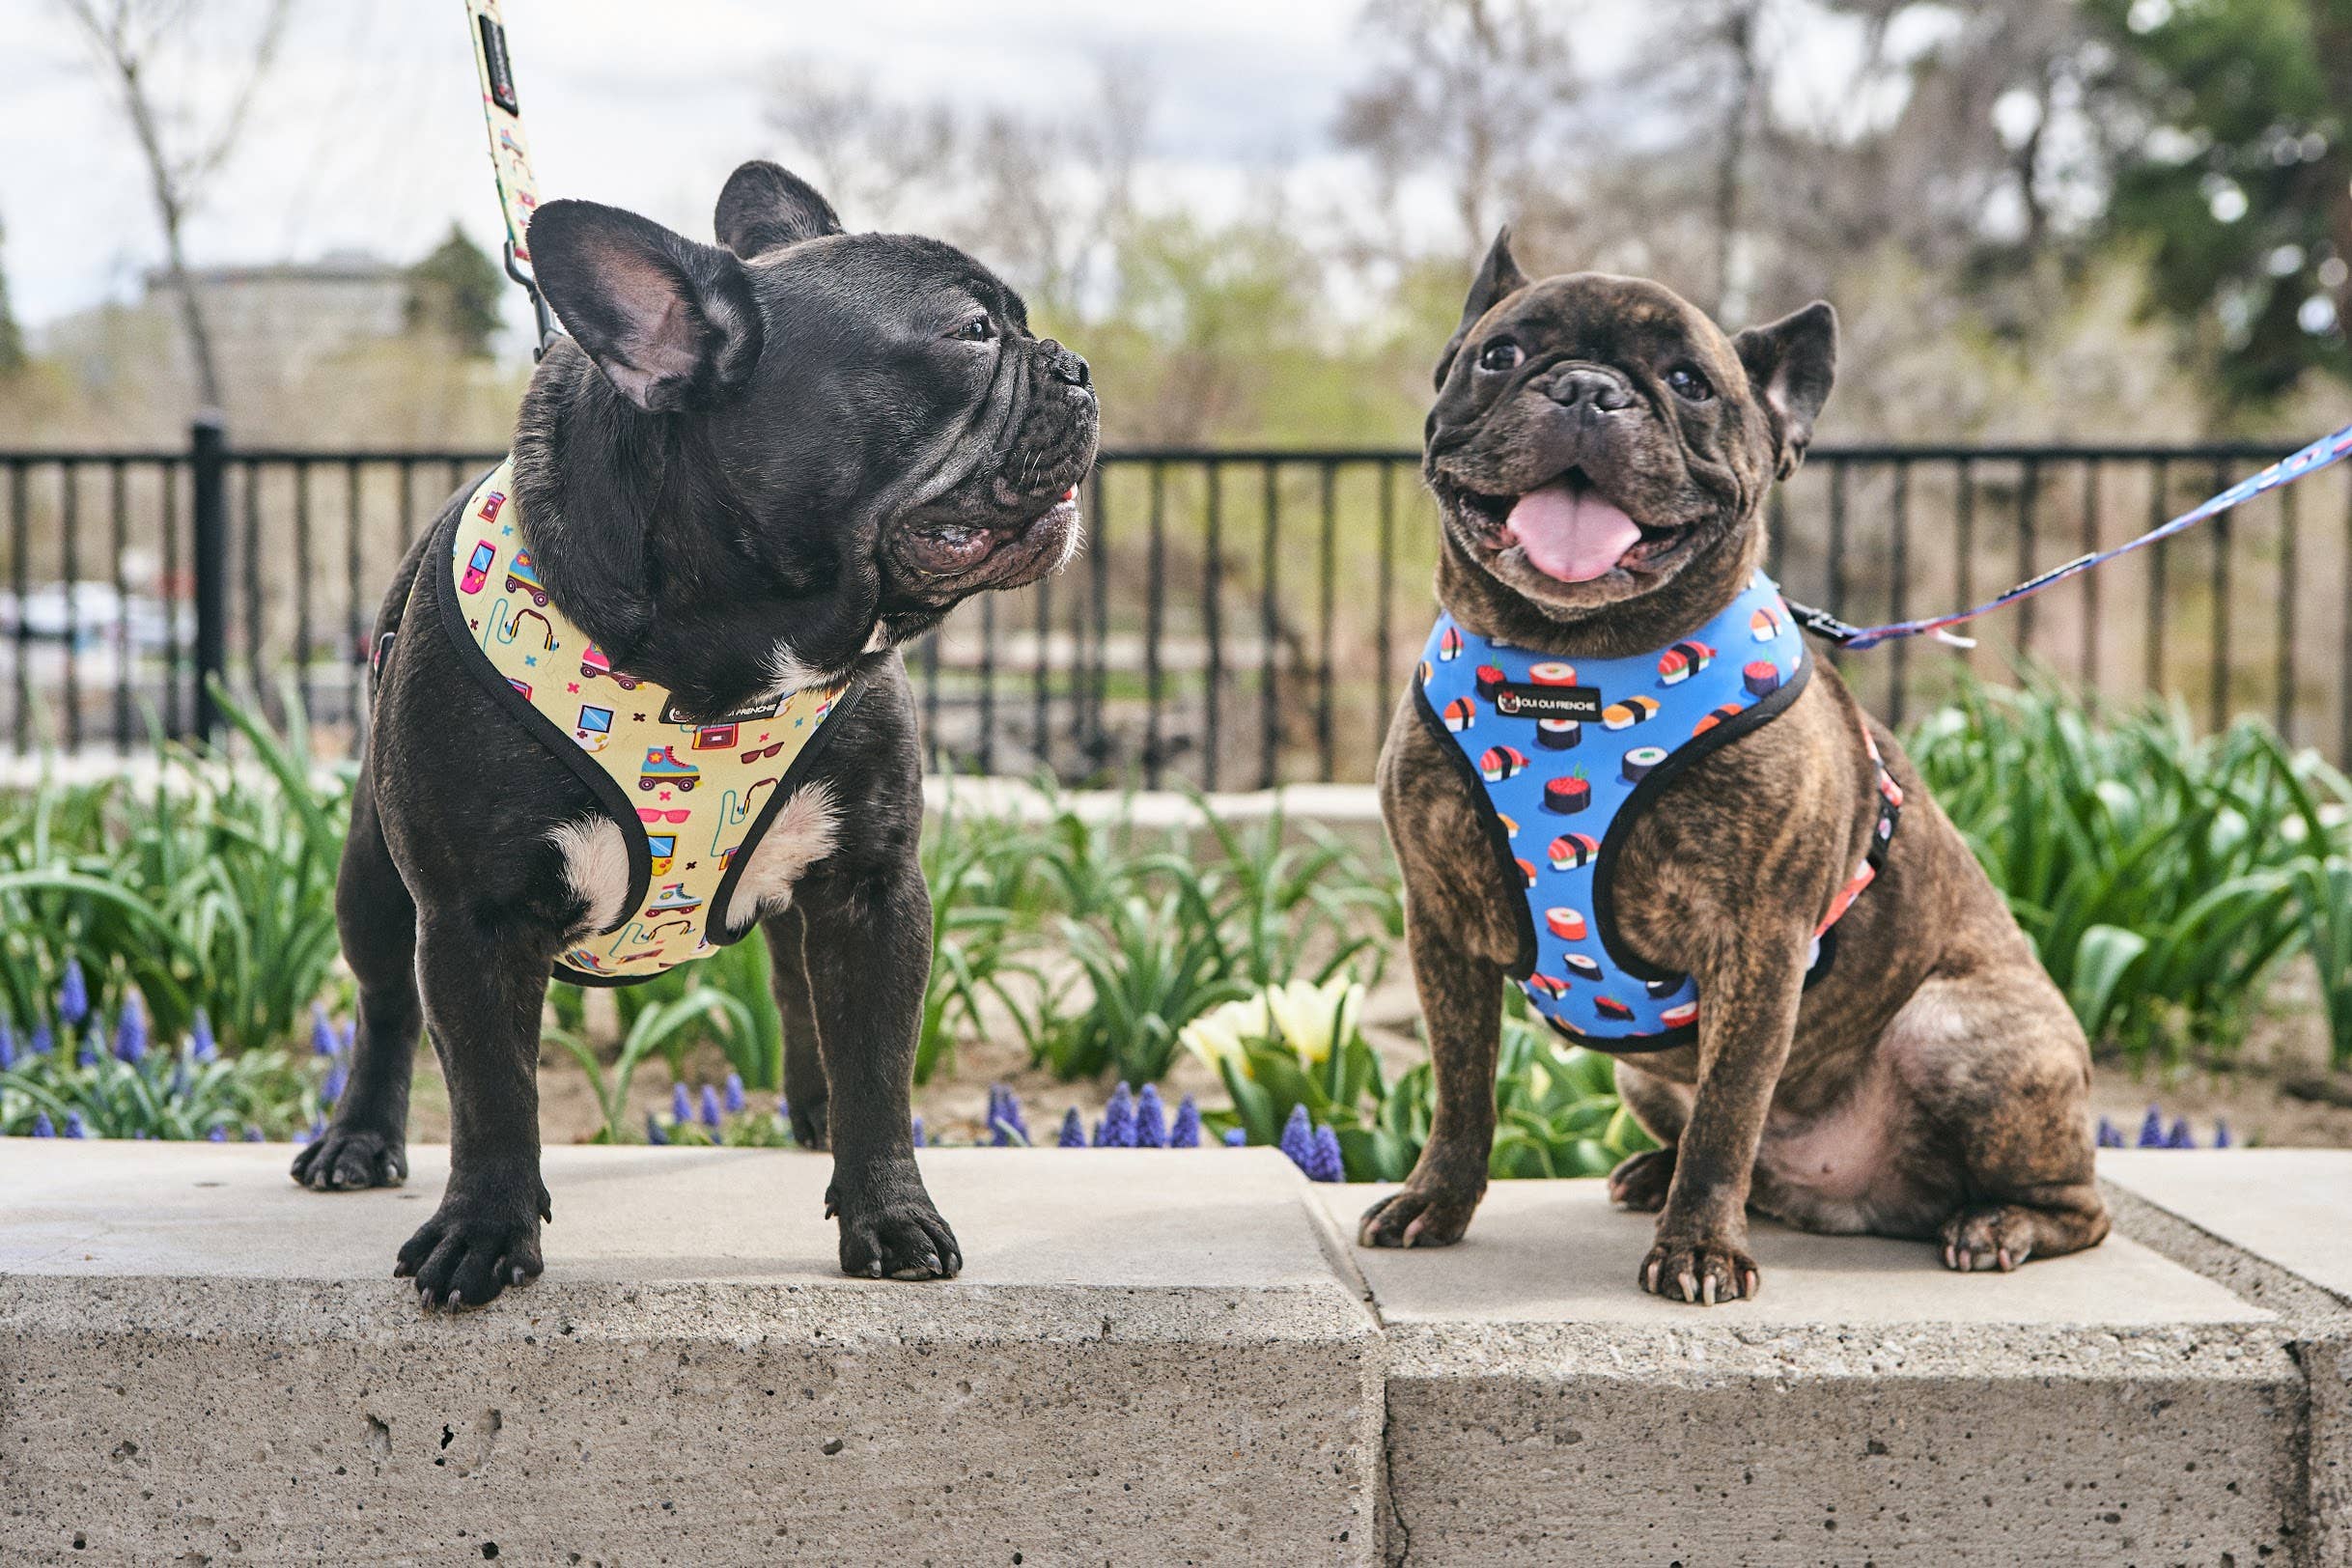 Frenchie Strap Harness - Bad to The Bone | Frenchie Bulldog | French Bulldog Accessories & Apparel